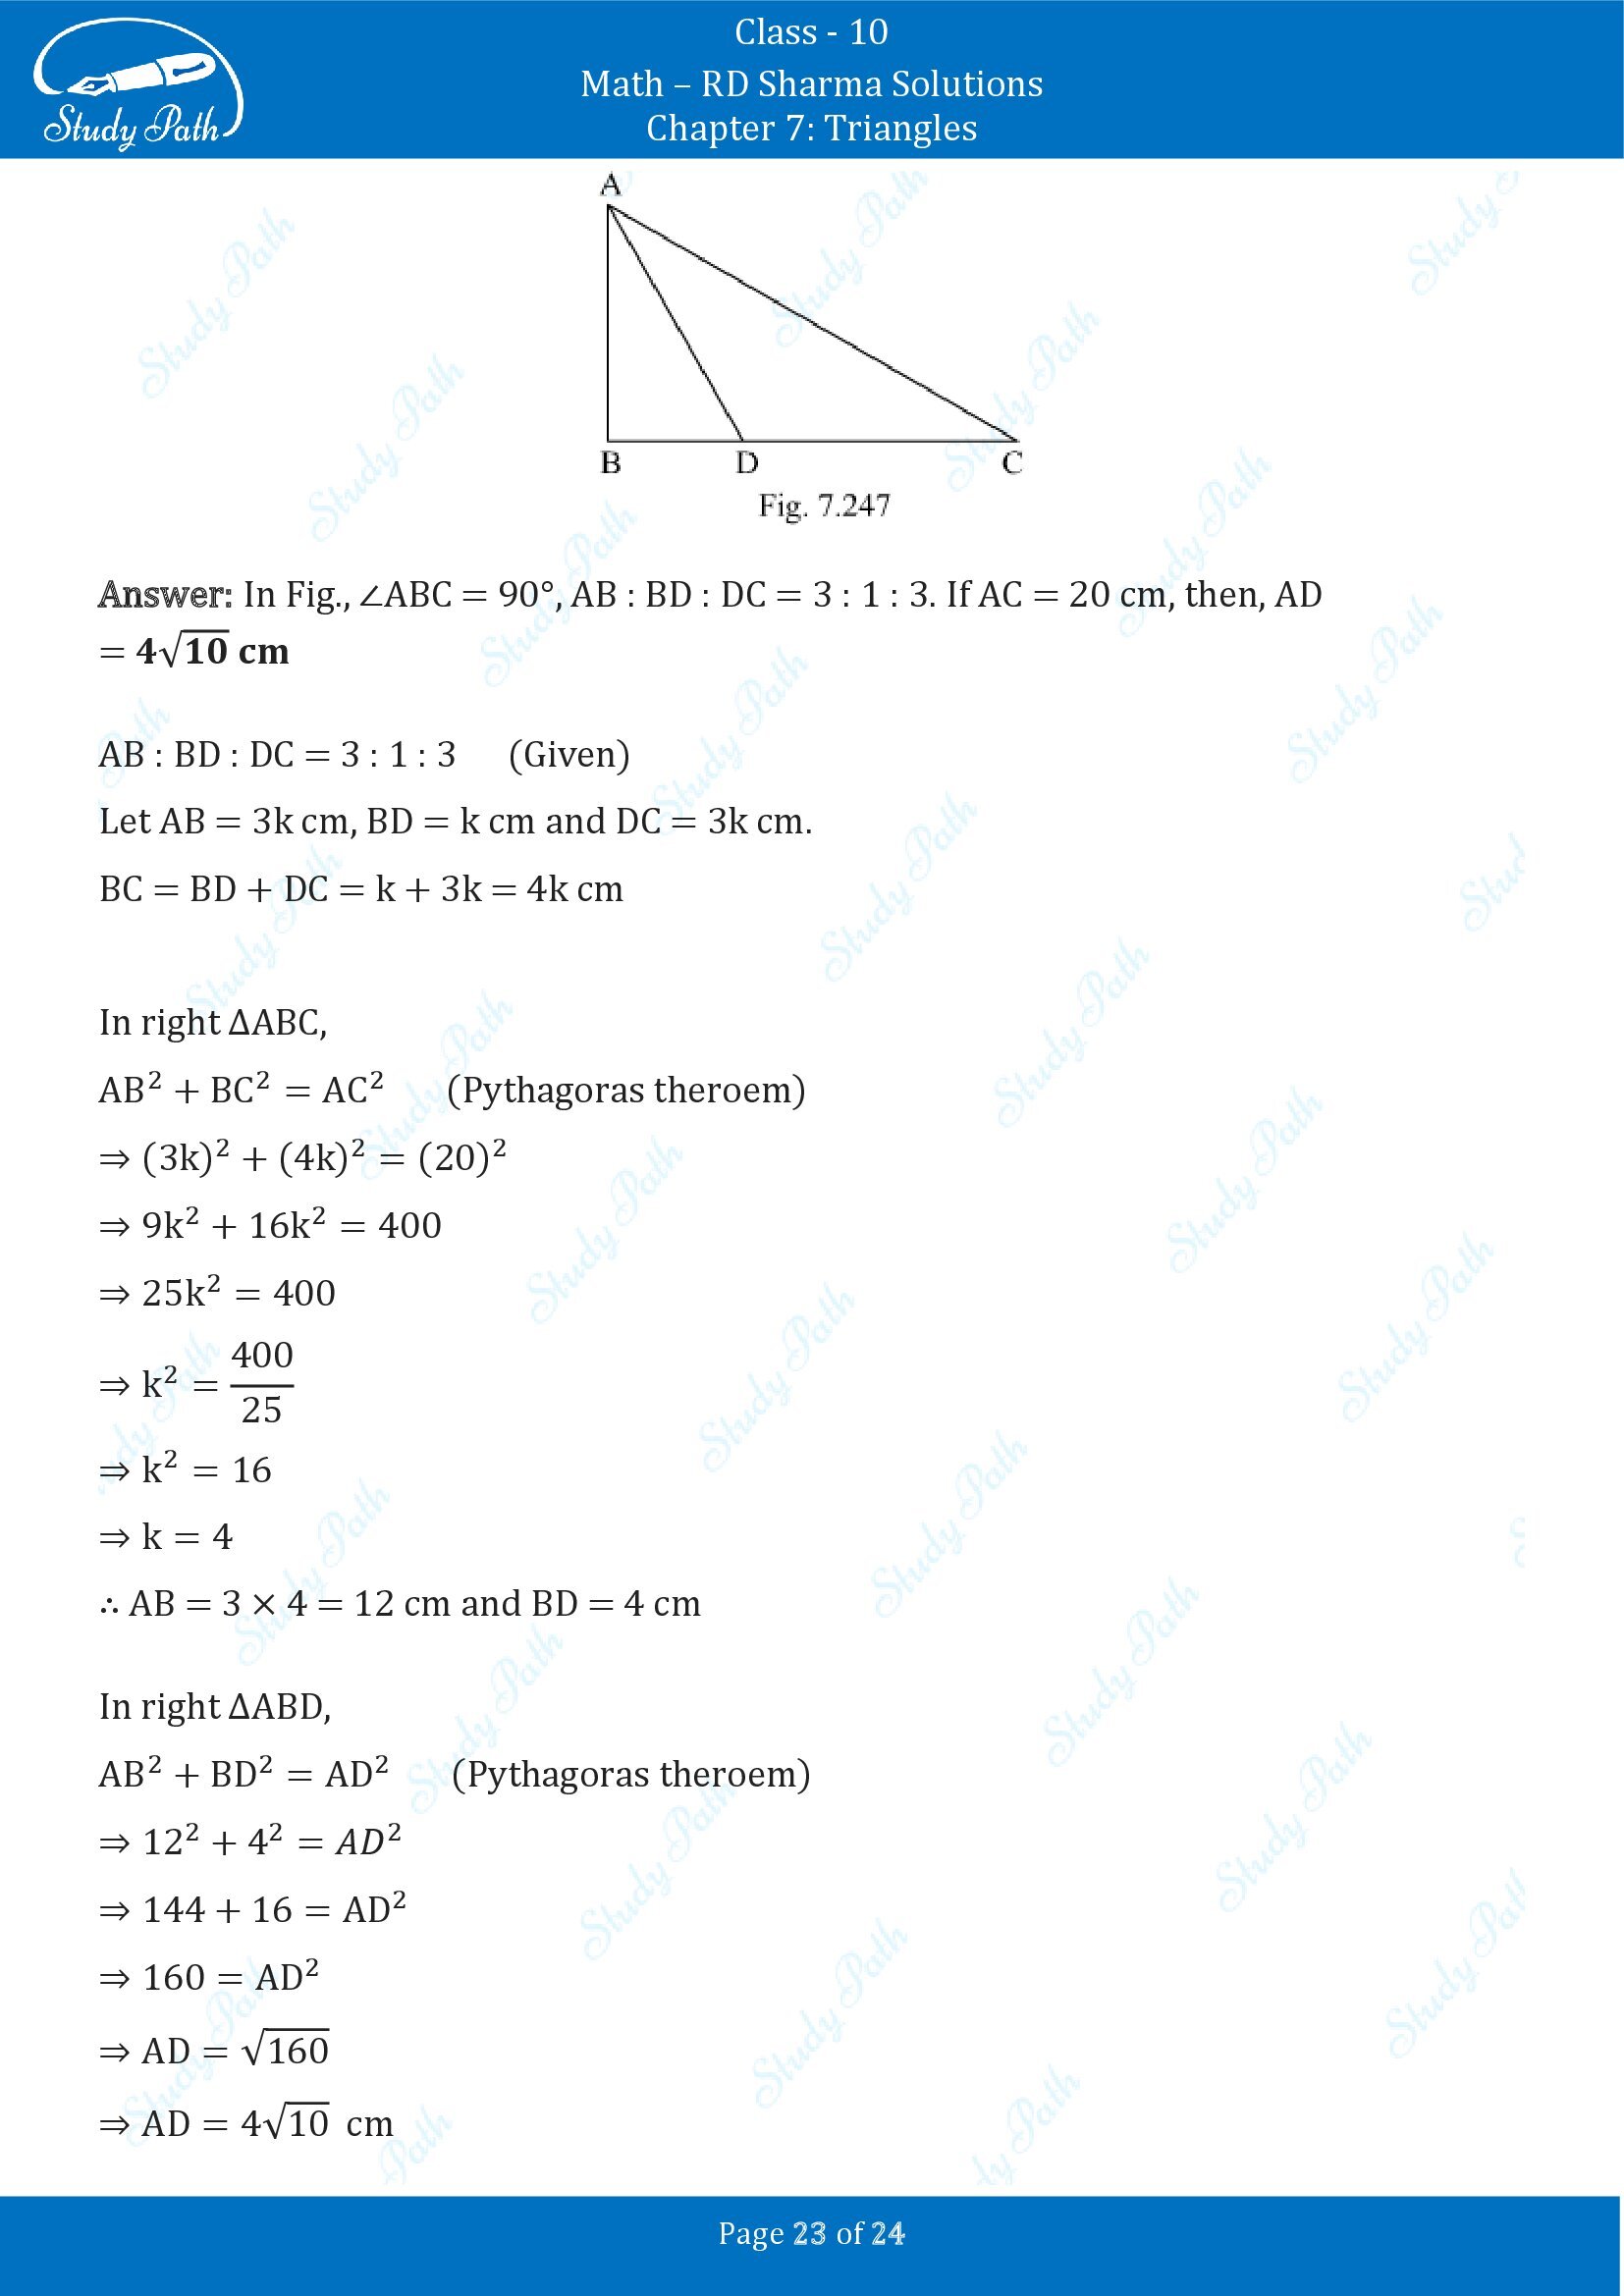 RD Sharma Solutions Class 10 Chapter 7 Triangles Fill in the Blank Type Questions FBQs 00023